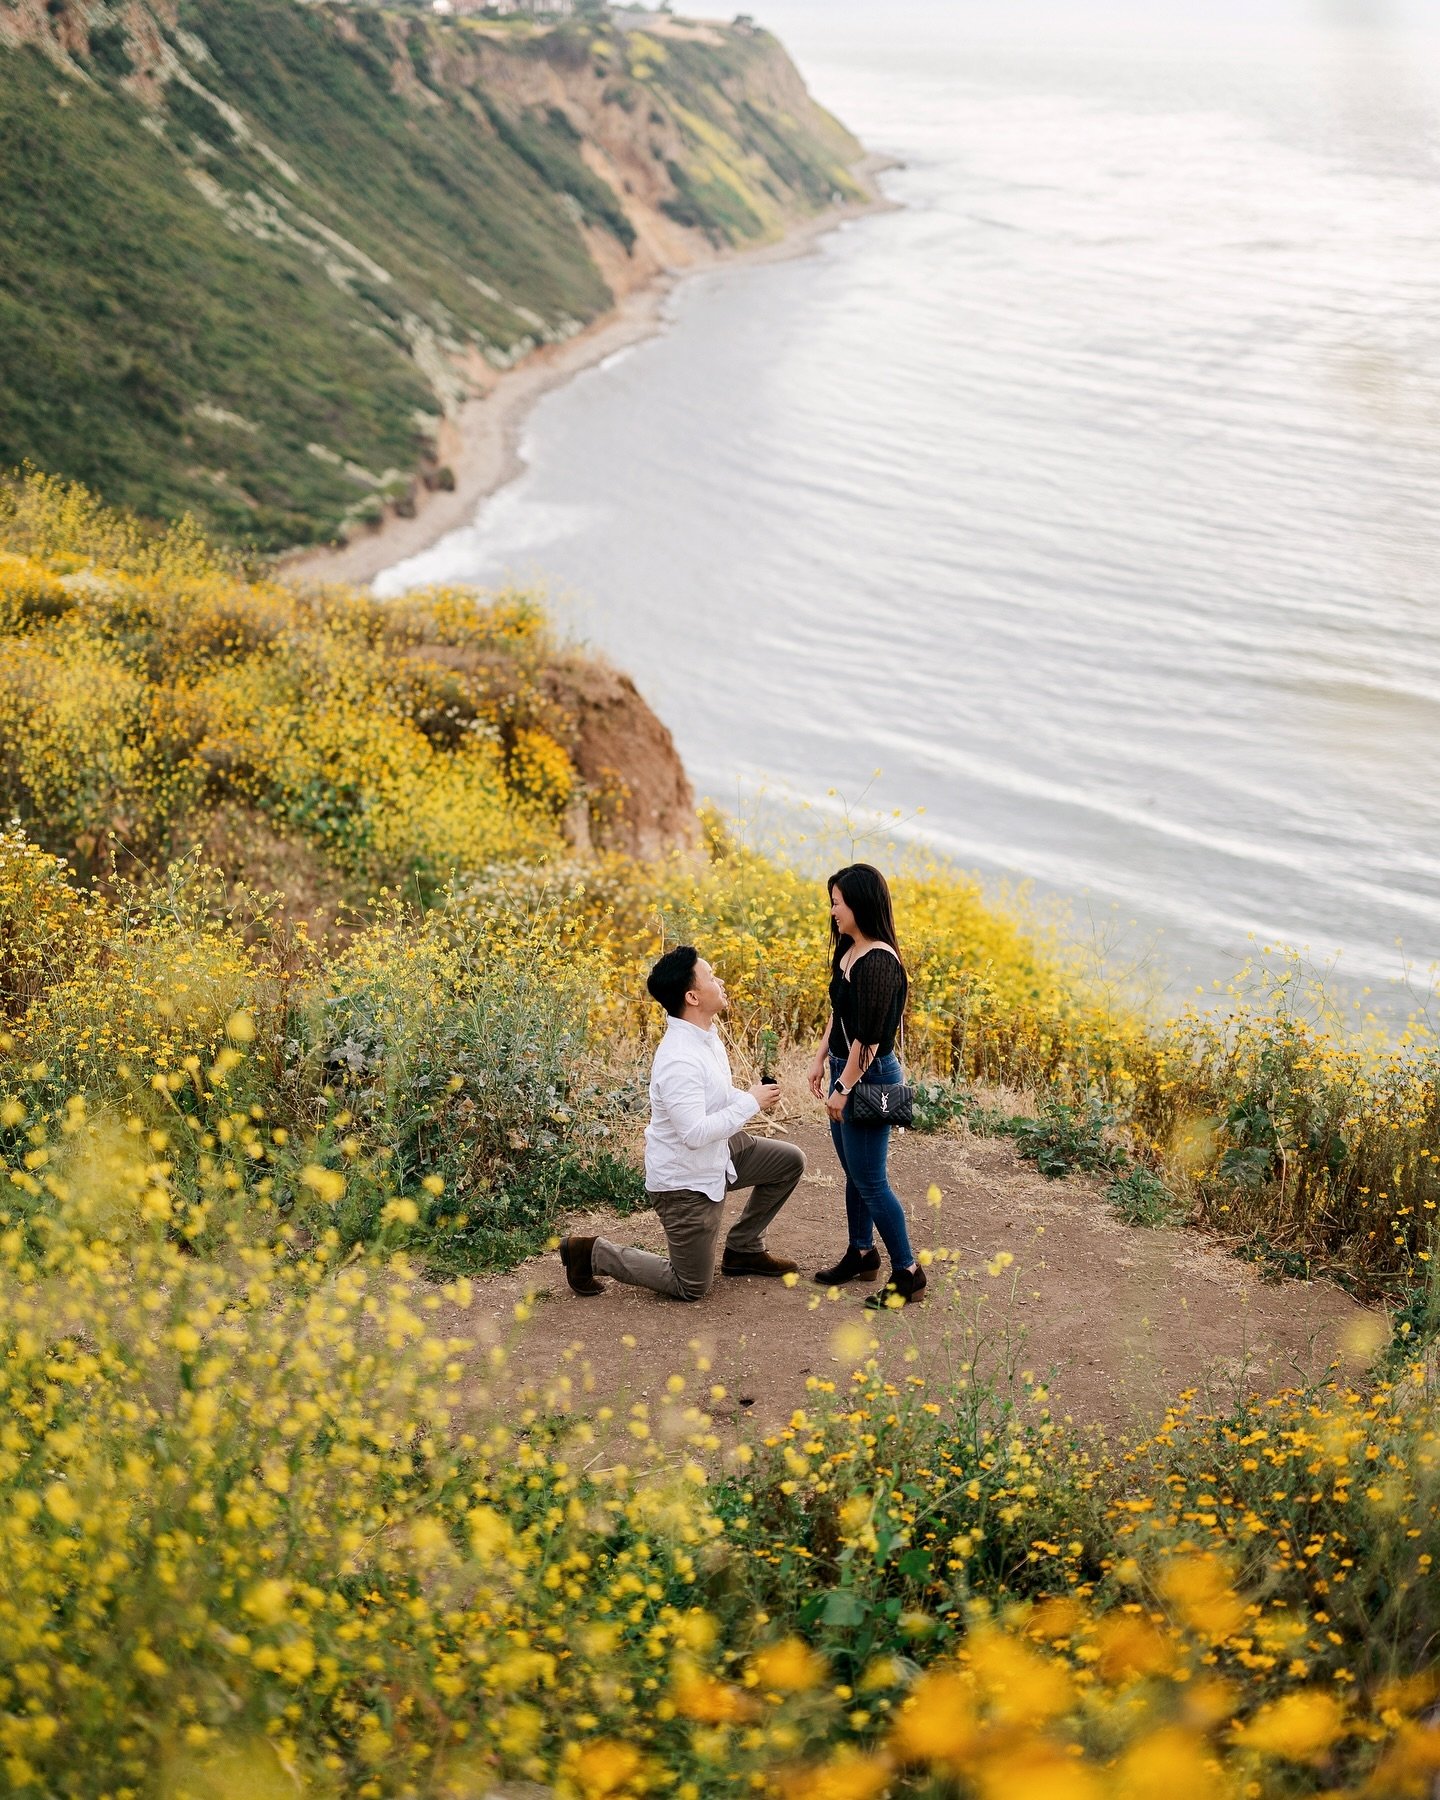 It was such a beautiful spot for a proposal&mdash;completely deserted except for me, hidden and waiting for the perfect moment. I captured it flawlessly. I always ask my clients if they noticed me, and this time, no one did! Ha ha!

#proposalphotogra